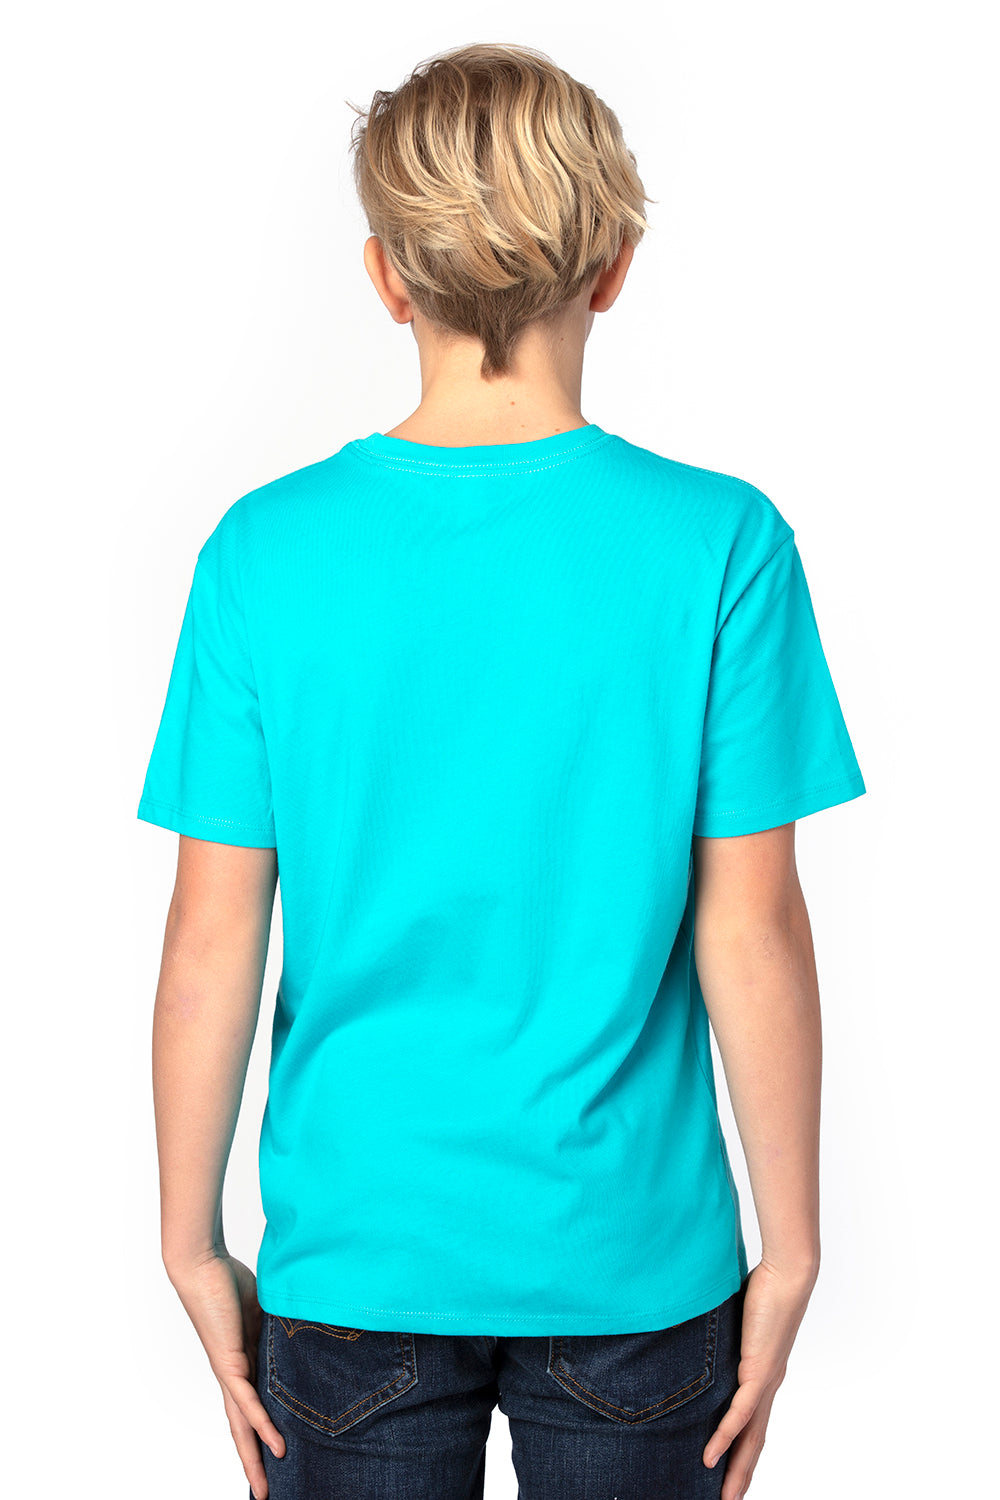 Threadfast Apparel 600A Youth Ultimate Short Sleeve Crewneck T-Shirt Pacific Blue Back